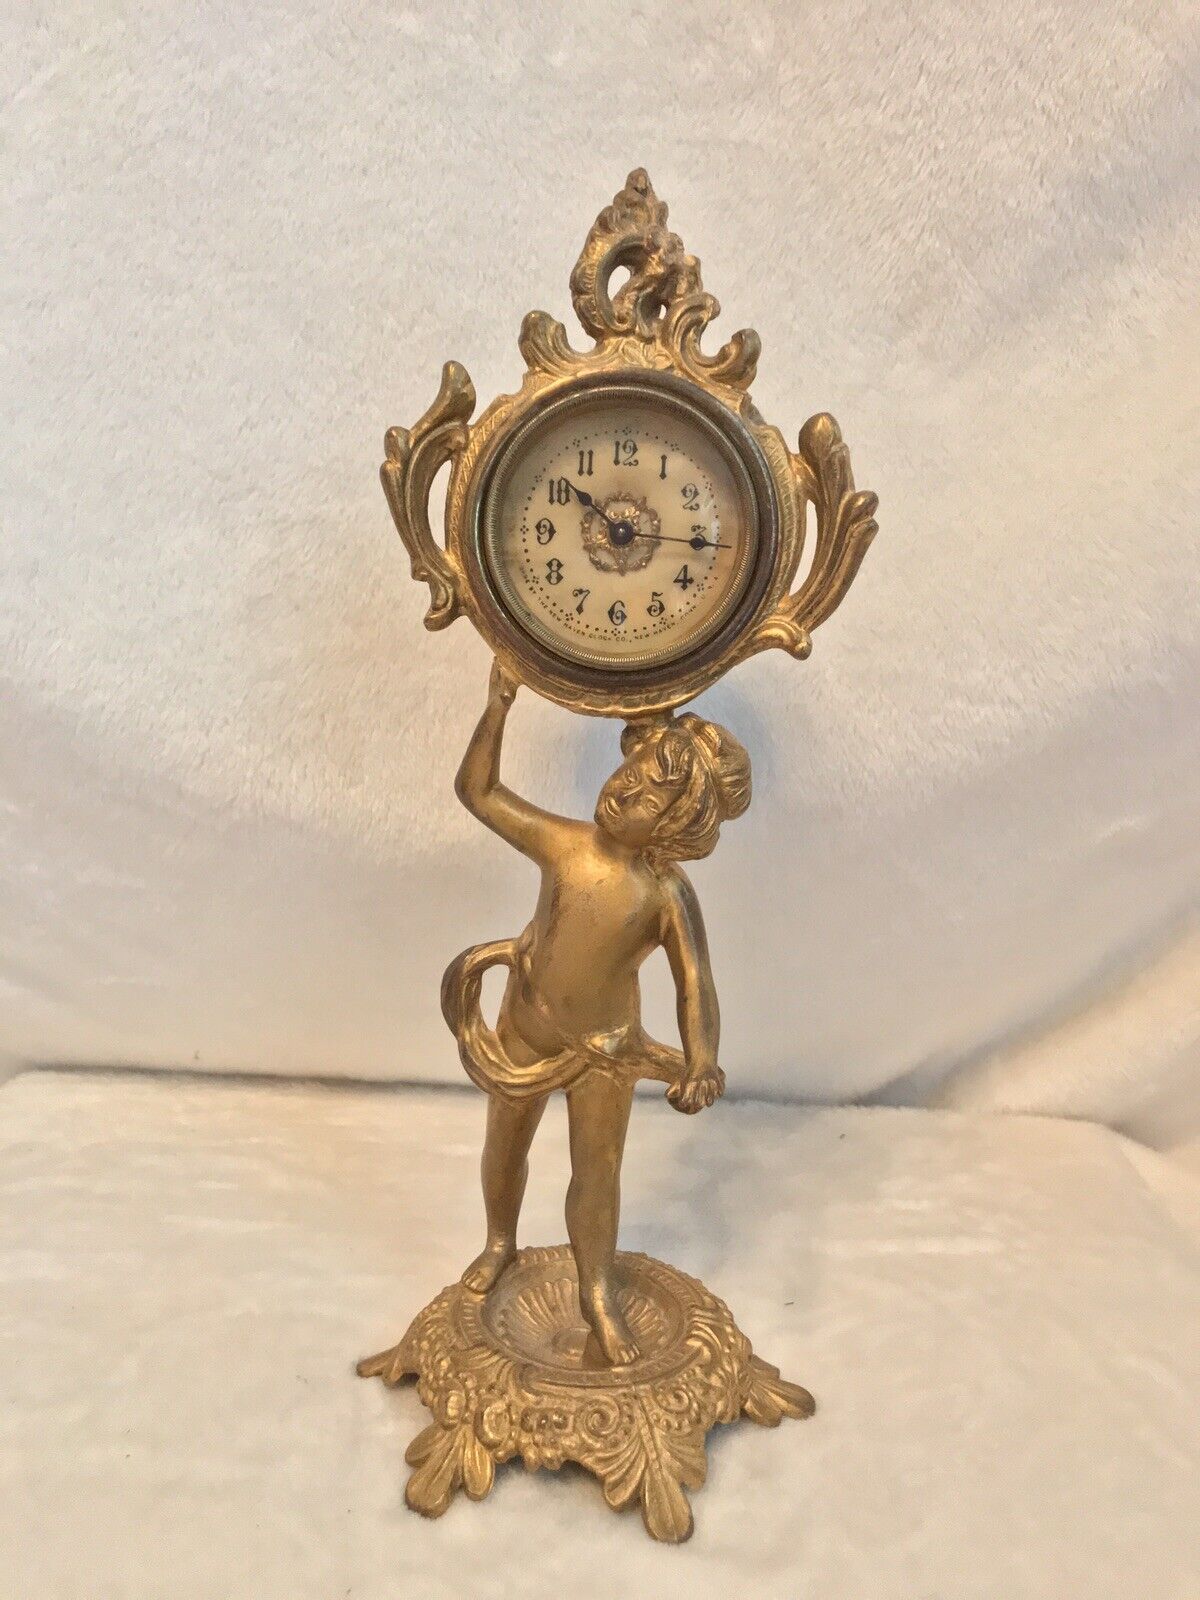 Antique 1800s NEW HAVEN CLOCK CO. Gold Cherub Desk Table Clock, Works Great